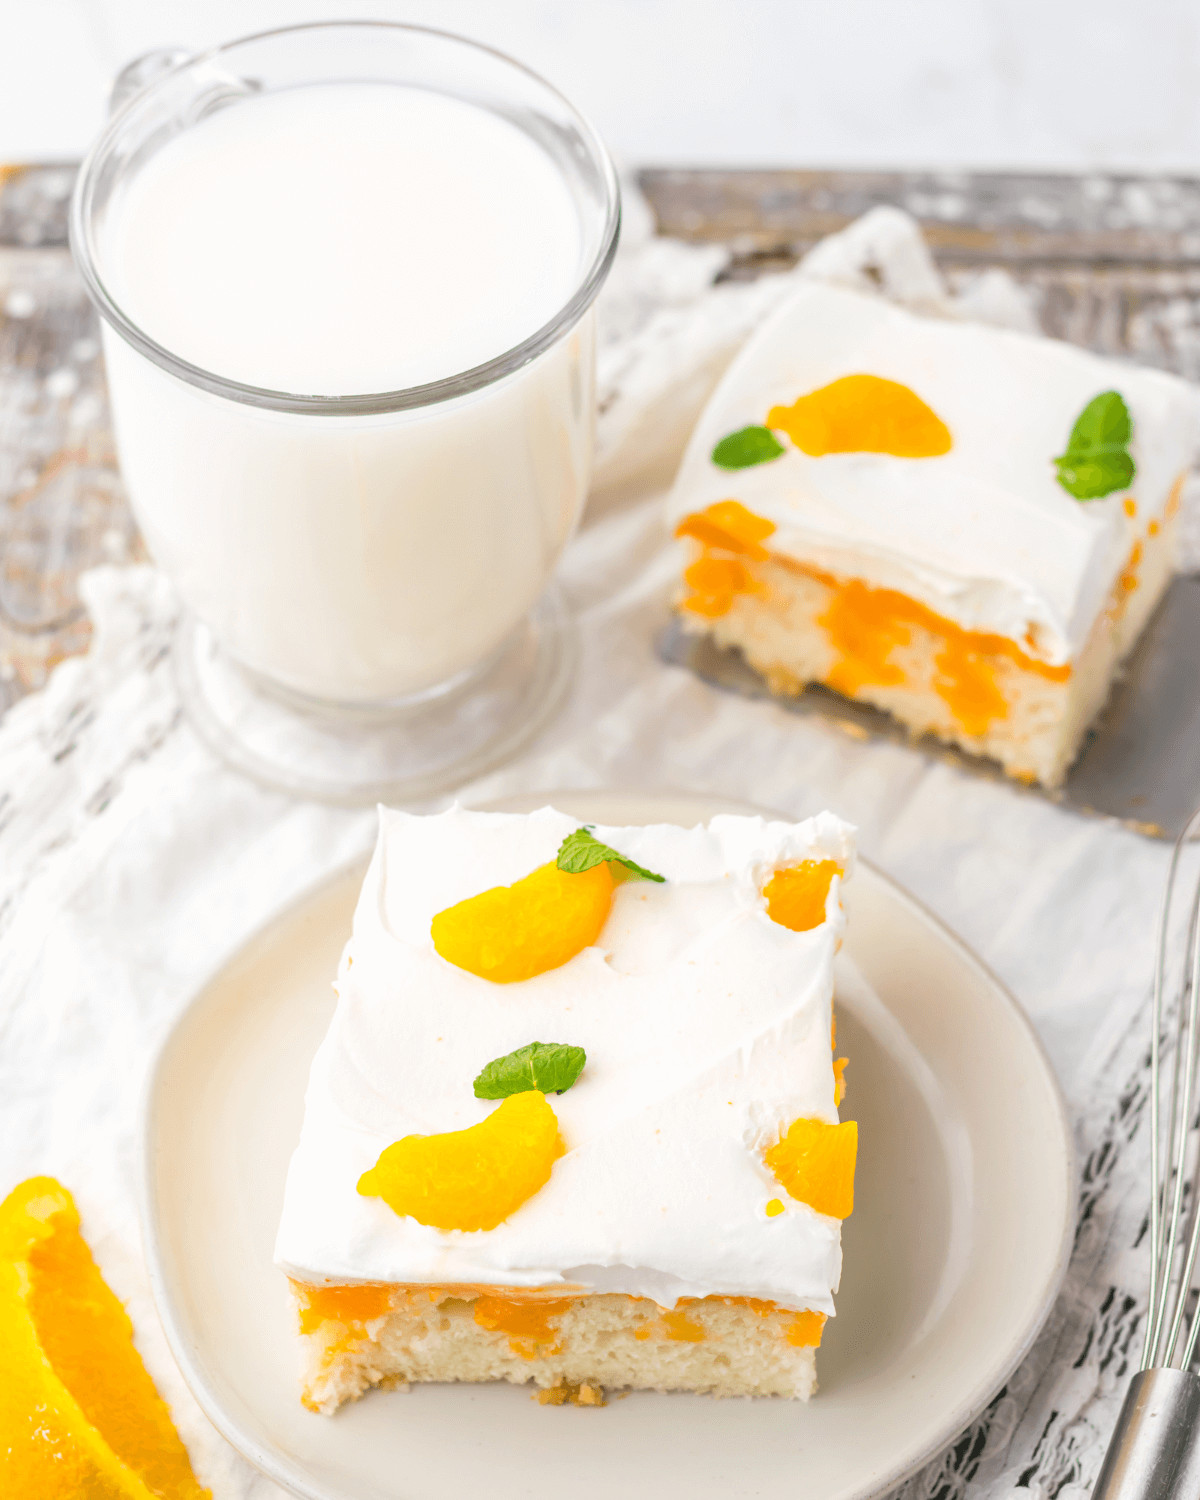 Two slices of dessert topped with whipped cream and orange segments, served with a glass of milk.